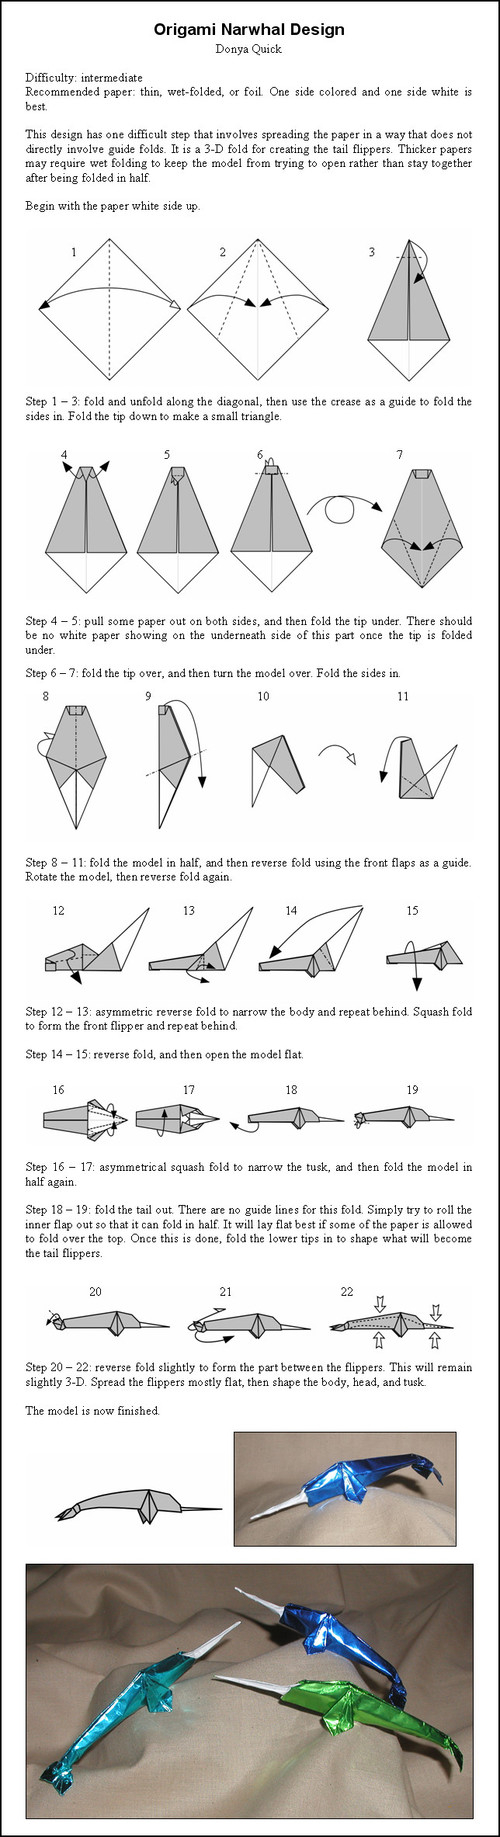 Origami Instruction Com Origami Narwhal Folding Instructions Origami Instruction